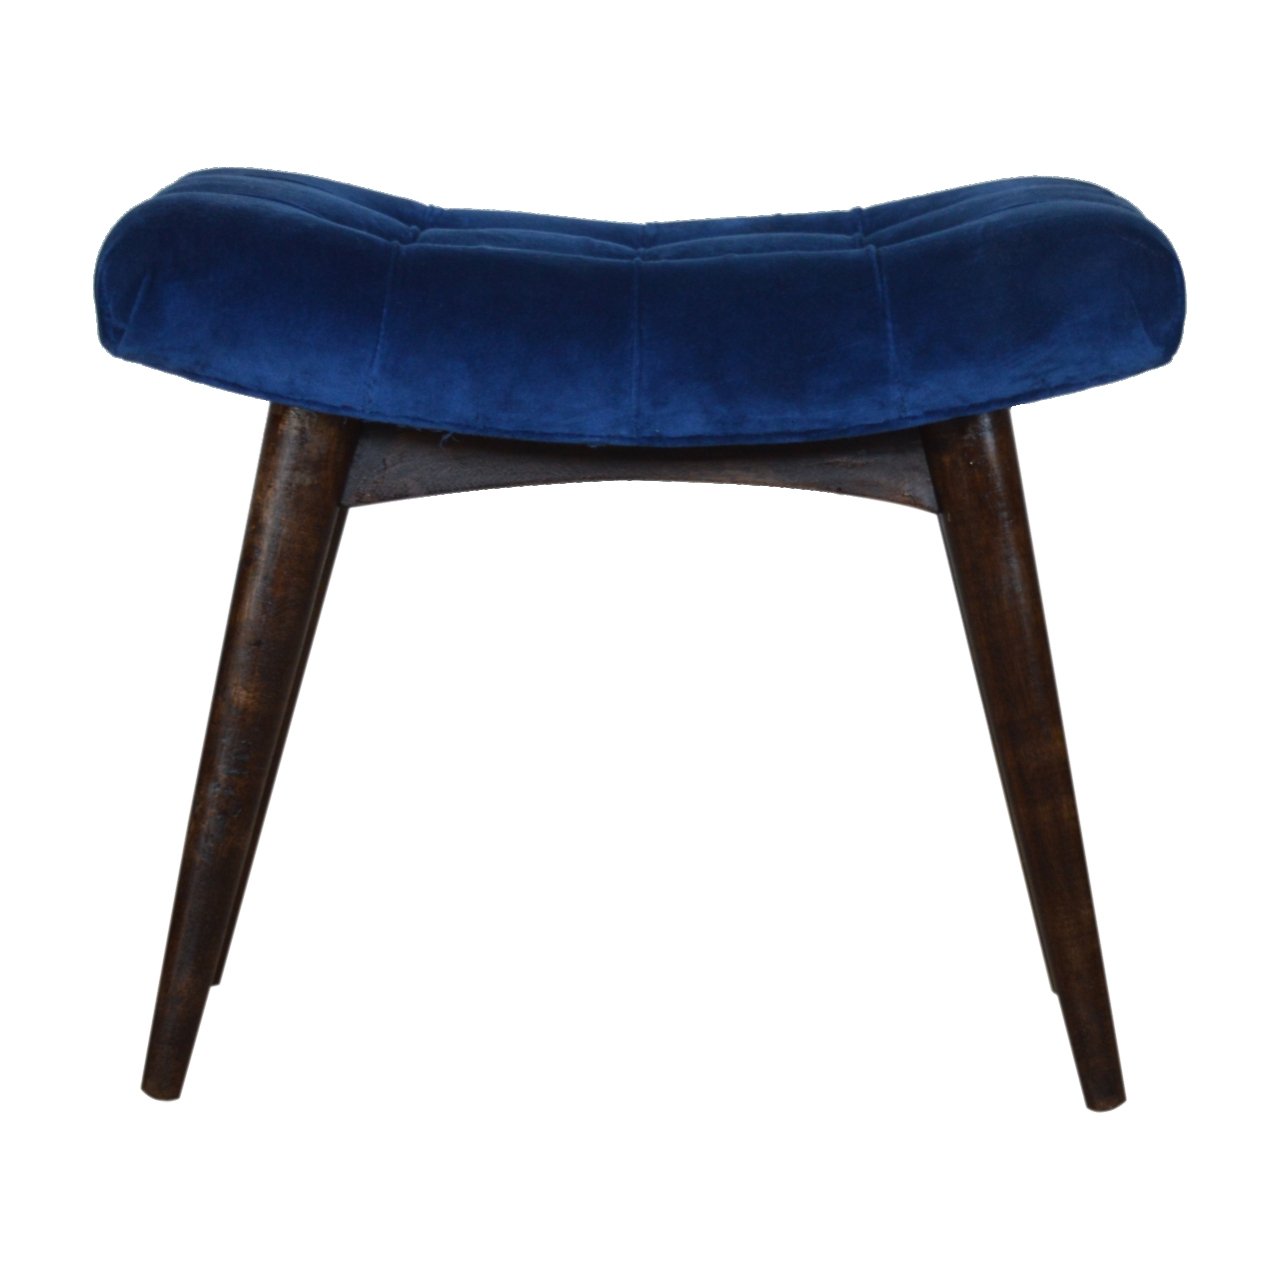 View Royal Blue Cotton Velvet Curved Bench information